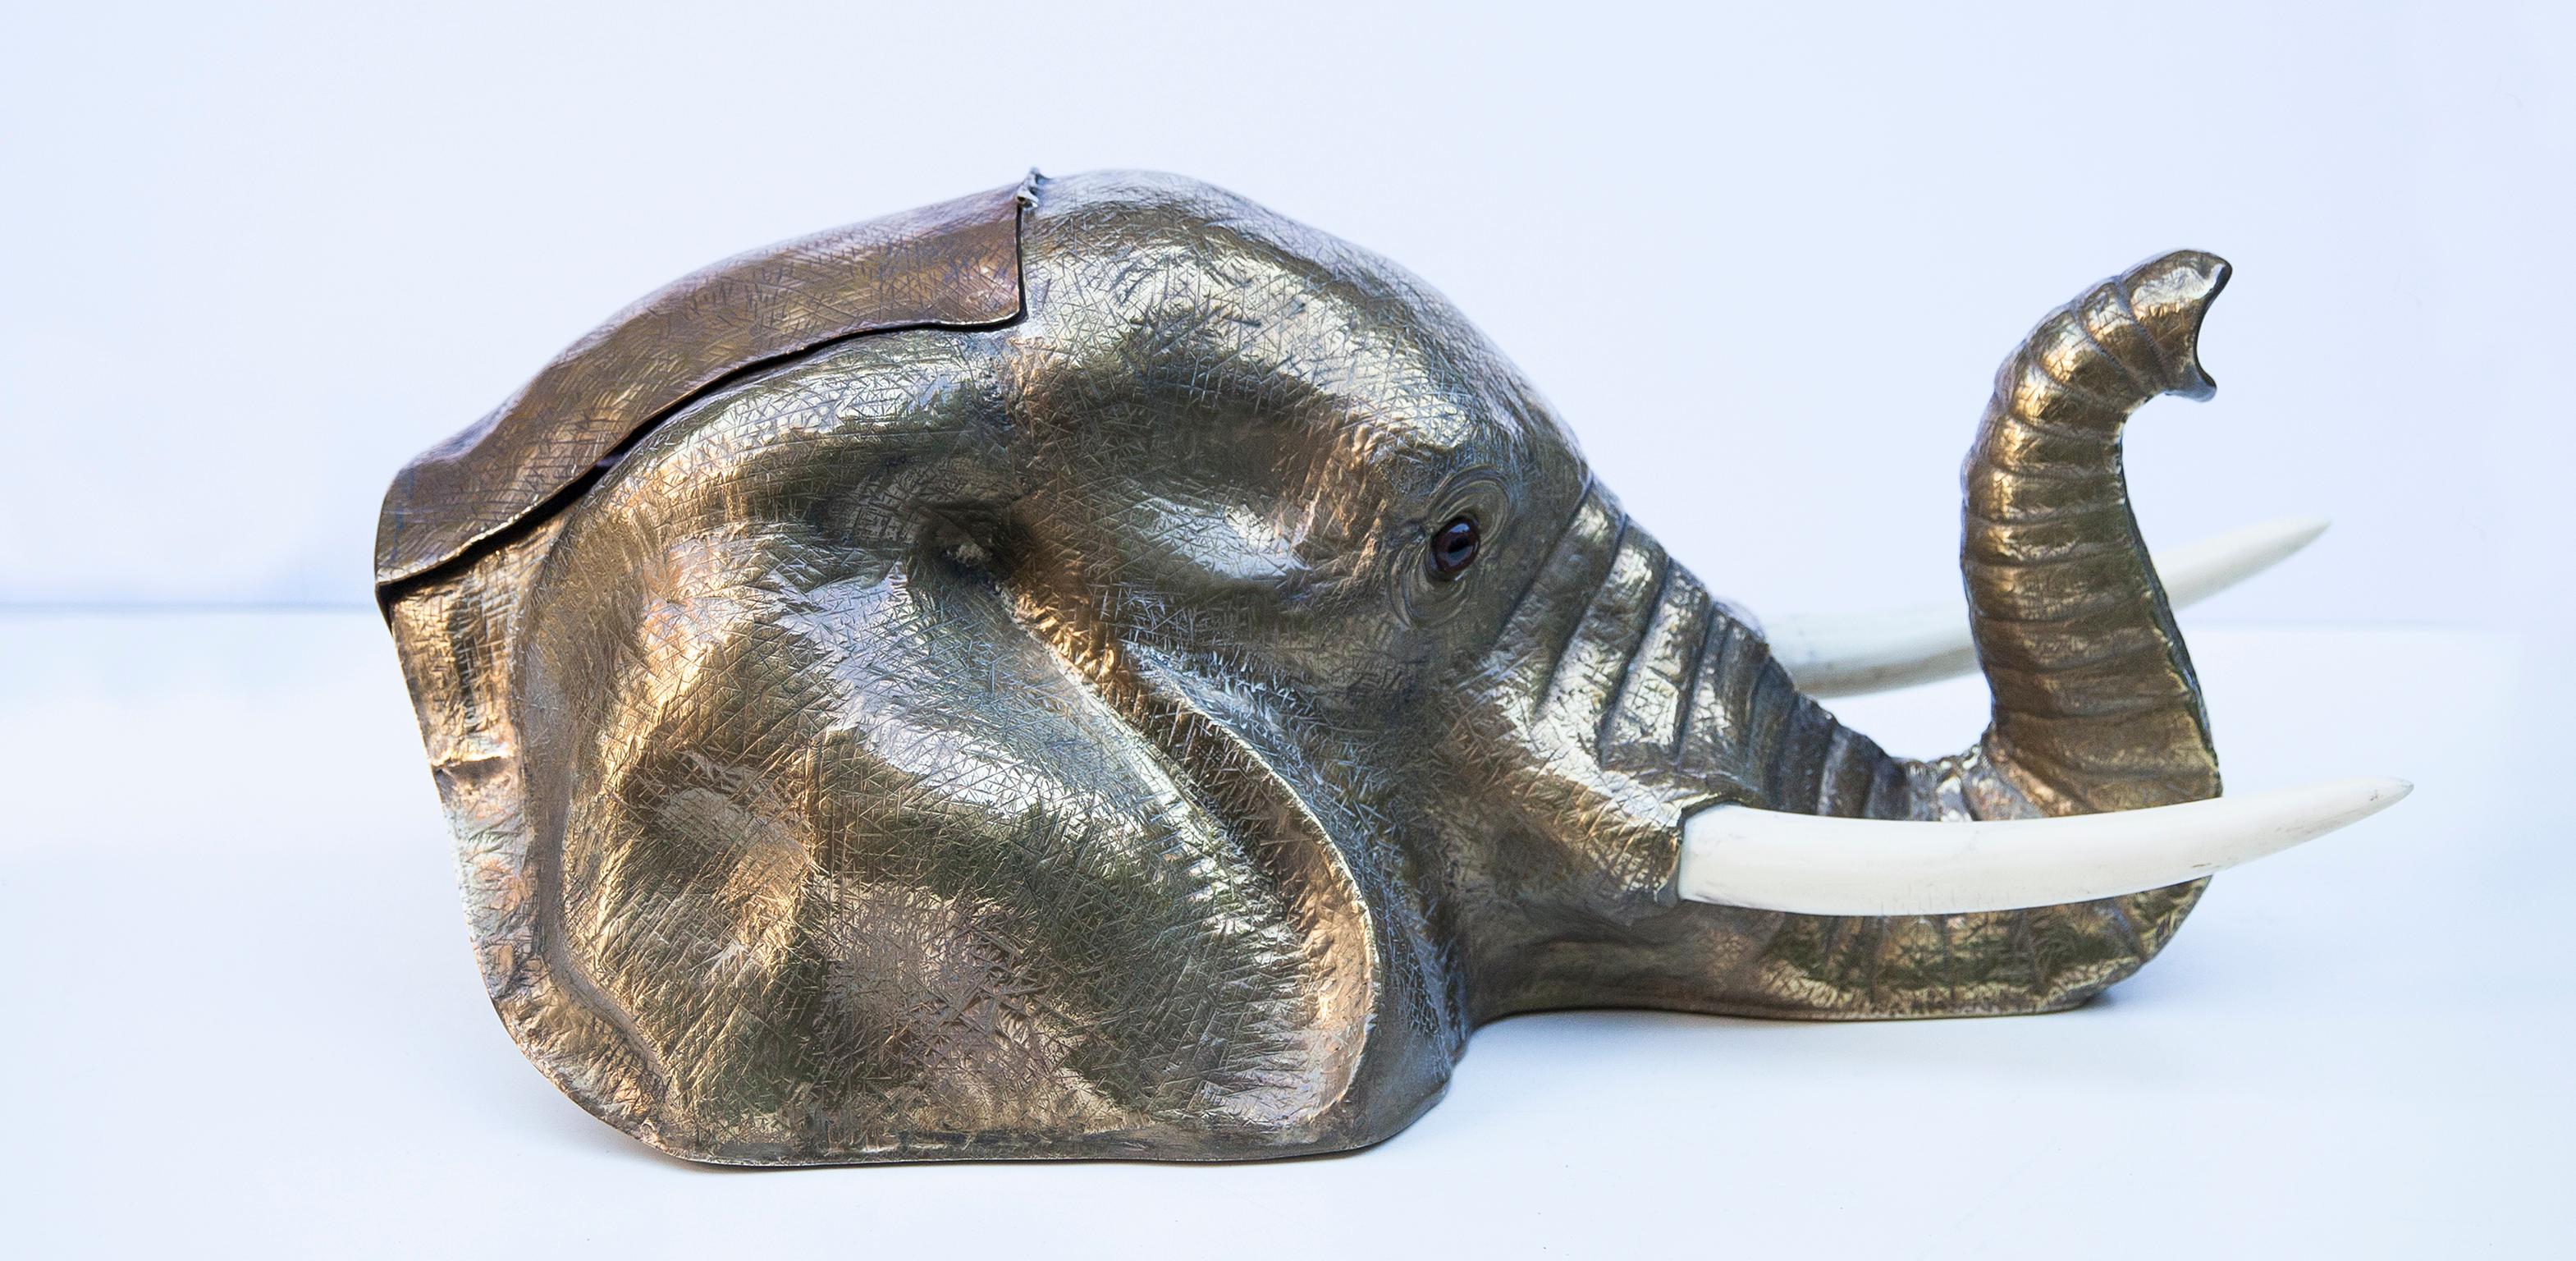 Franco Lapinis exquisite vintage elephant sculpture is made entirely of metal-plated in silver and gold and its surface is lightly textured to give it an organic feel, the fake ivory horns gracing a striking contrasts to the silver with its ivory